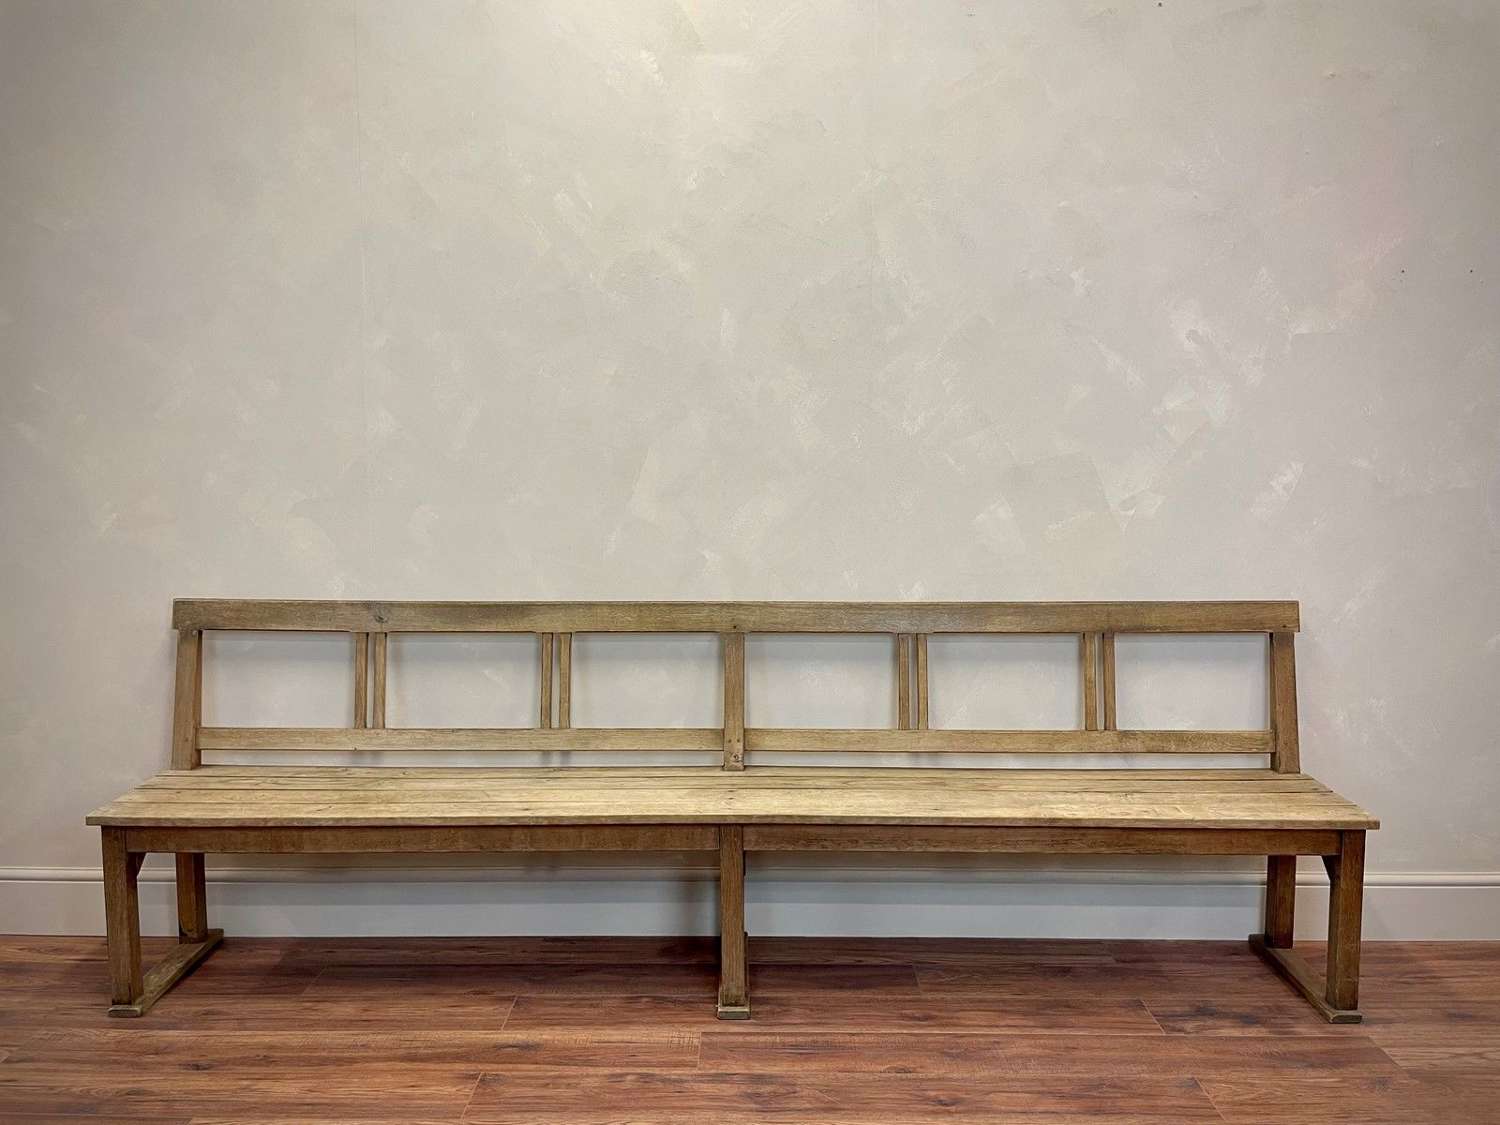 Large scale bleached oak bench